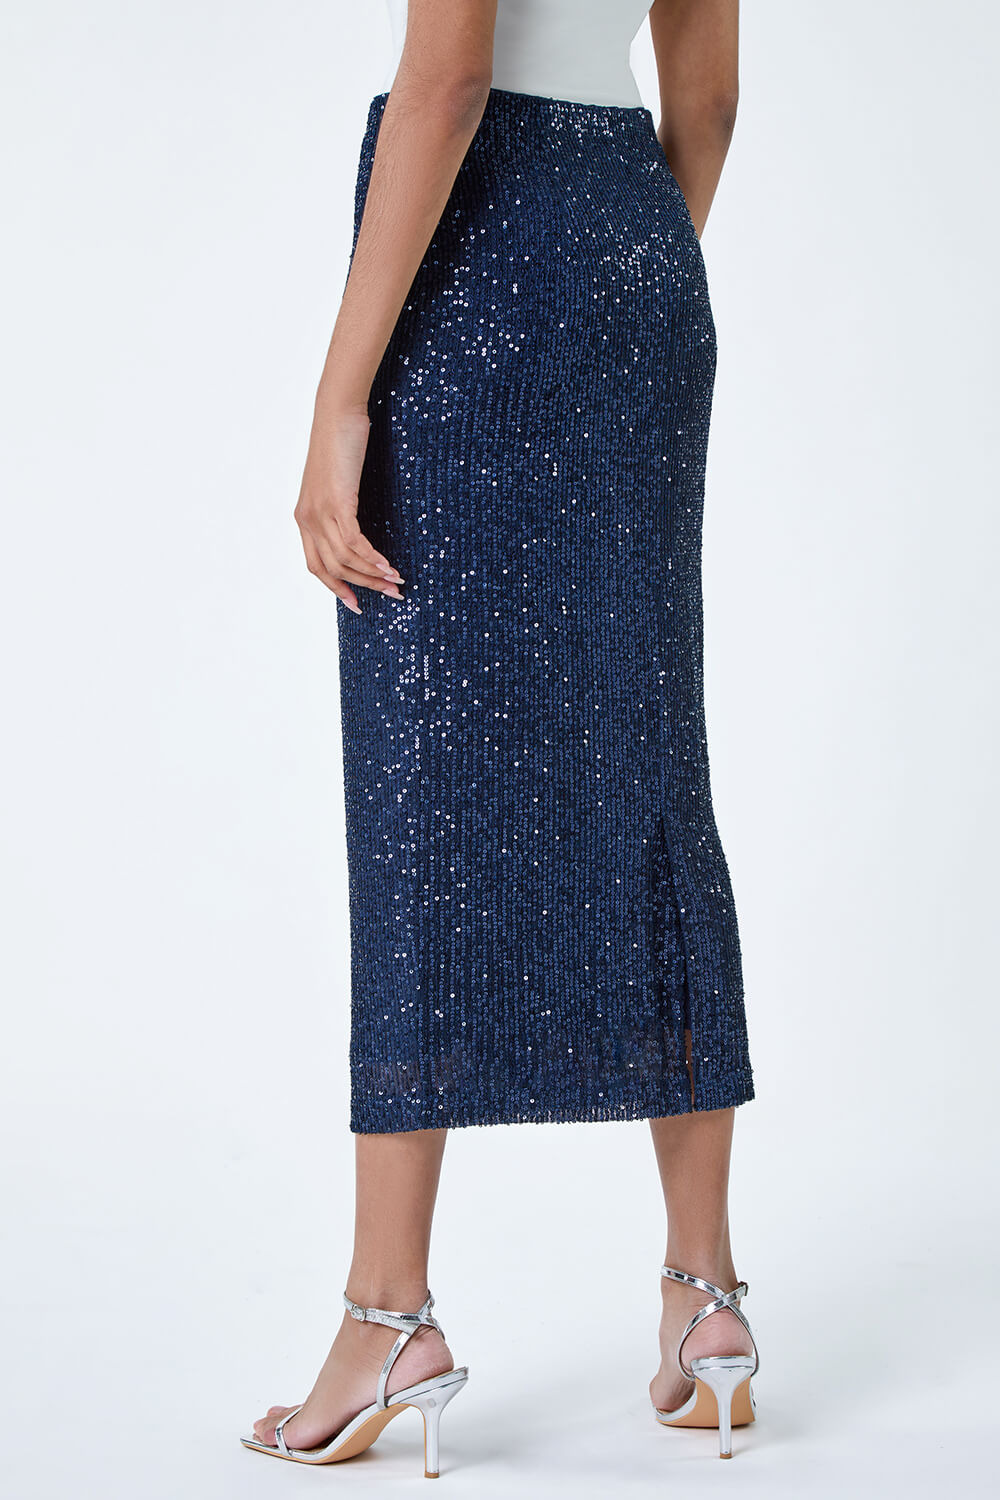 Navy  Sequin Sparkle Stretch Midi Skirt, Image 3 of 5